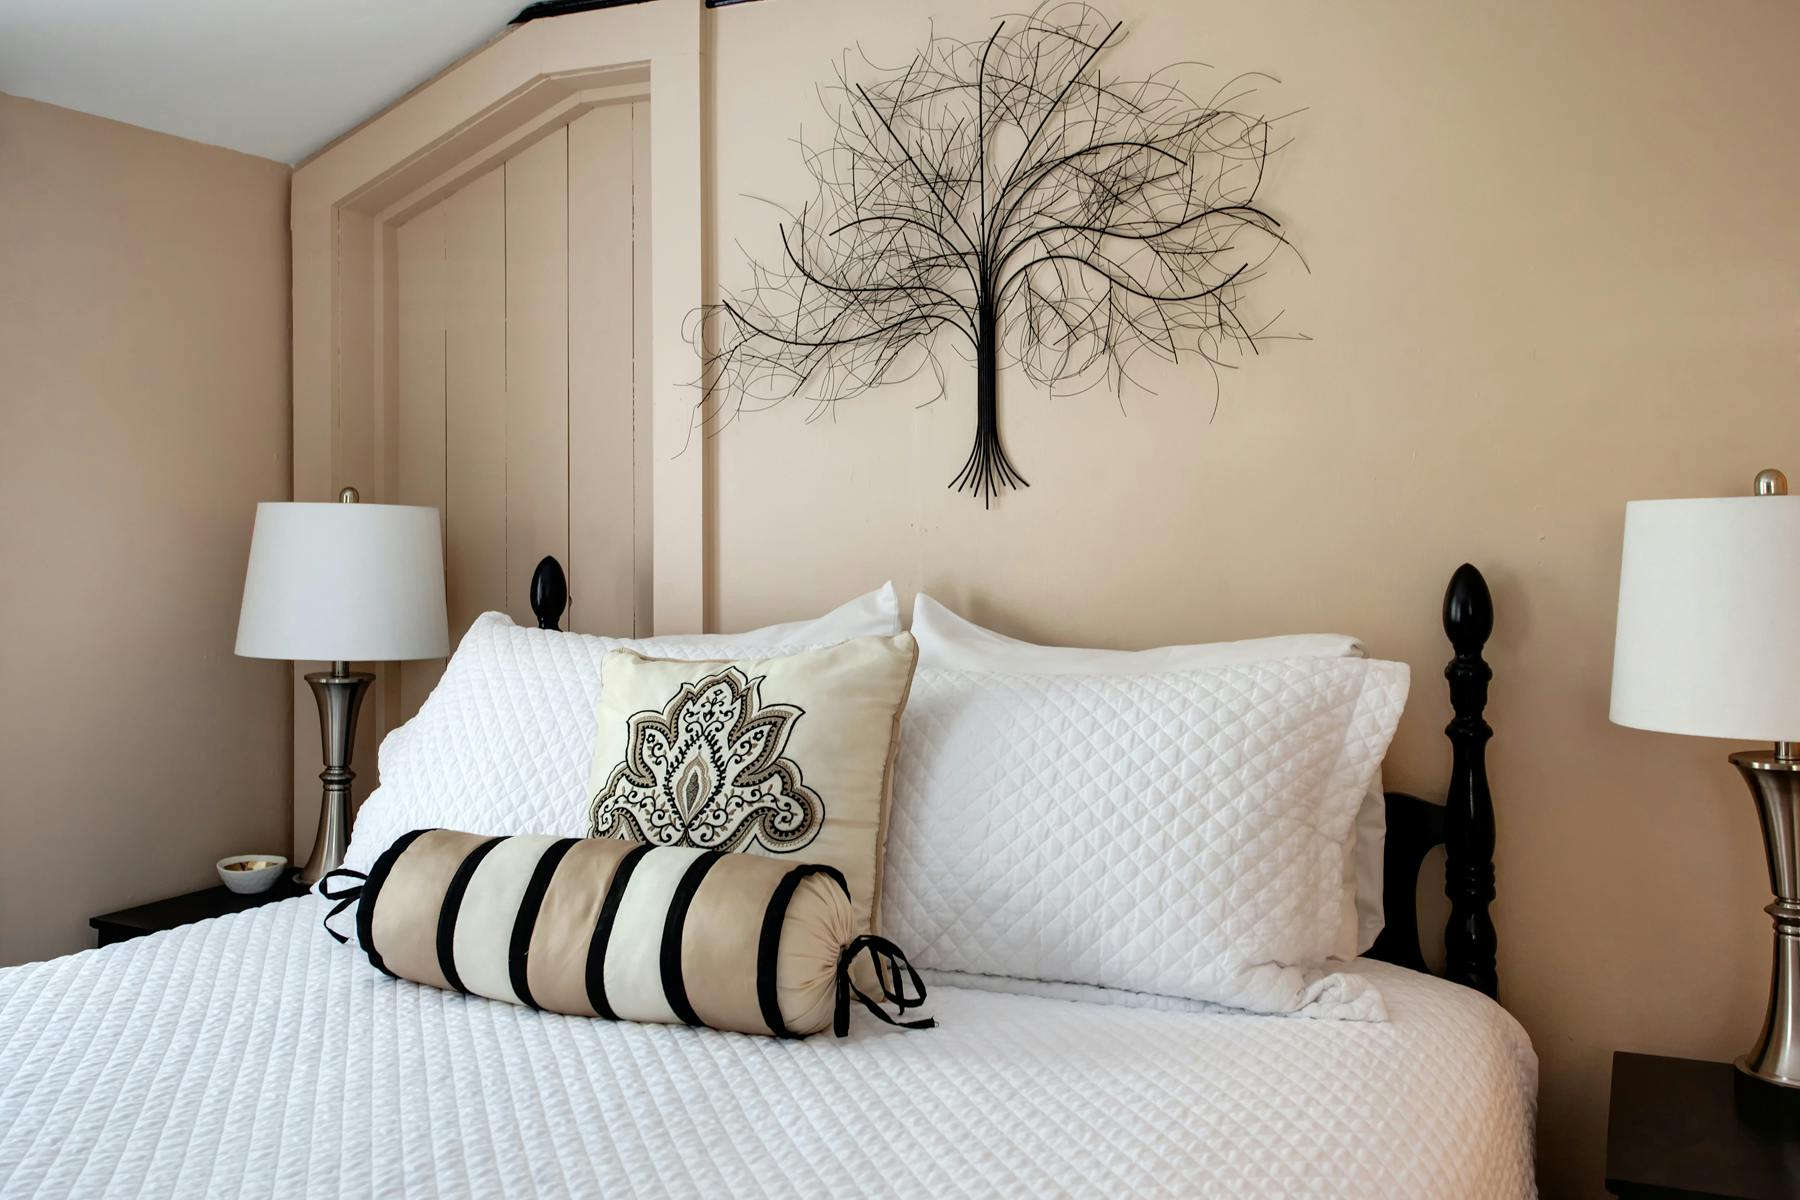 Close up of headboard of bed with decorative throw pillows, nightstands with matching lamps, and decorative tree on wall above